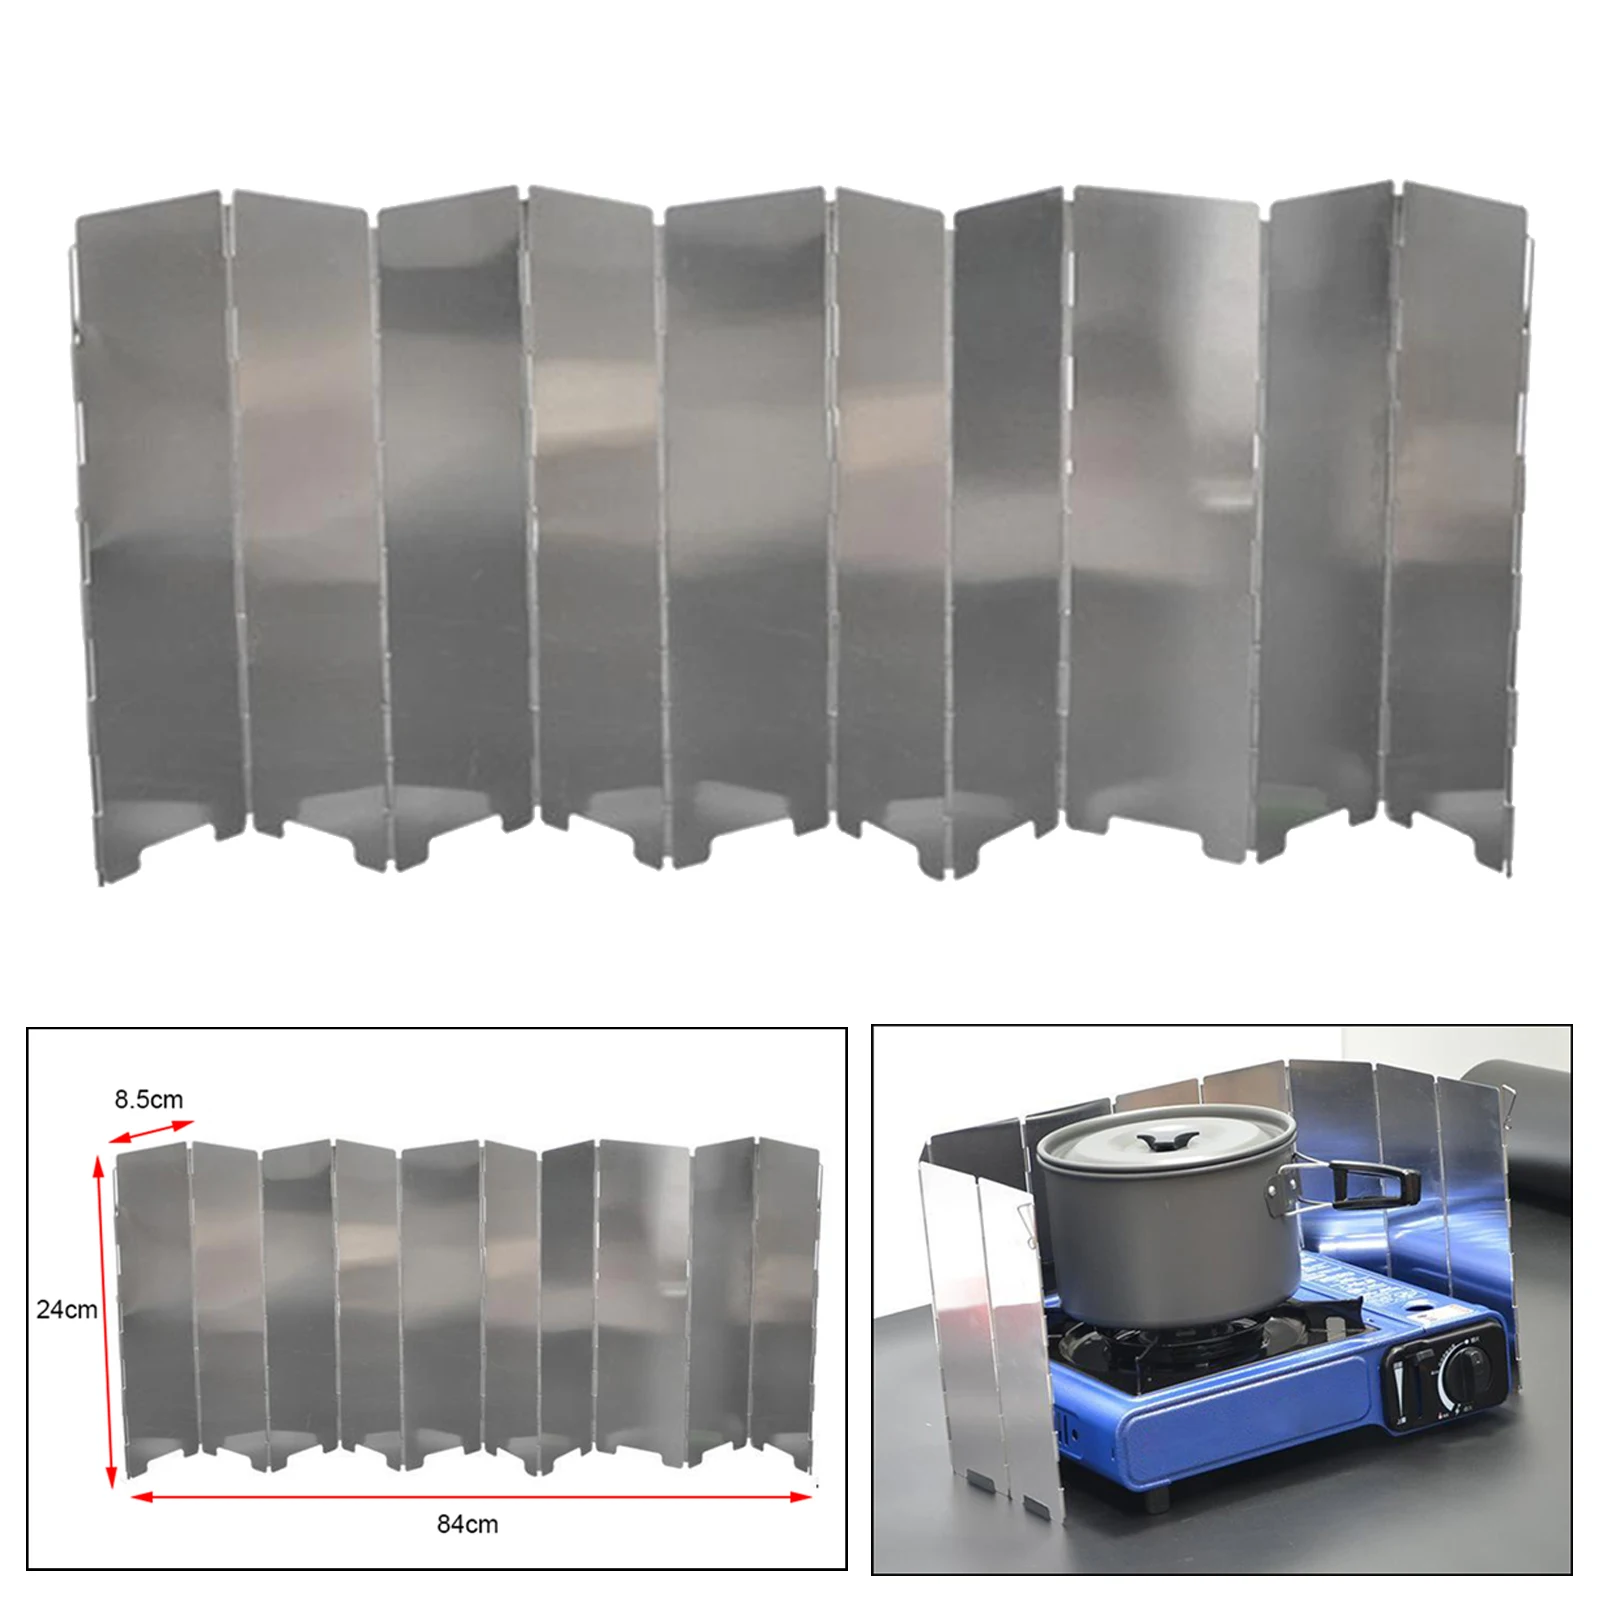 Folding Outdoor Stove Windscreen 10 Plates Aluminum Camping Stove Windshield for Outdoor Hiking Picnic Traveling